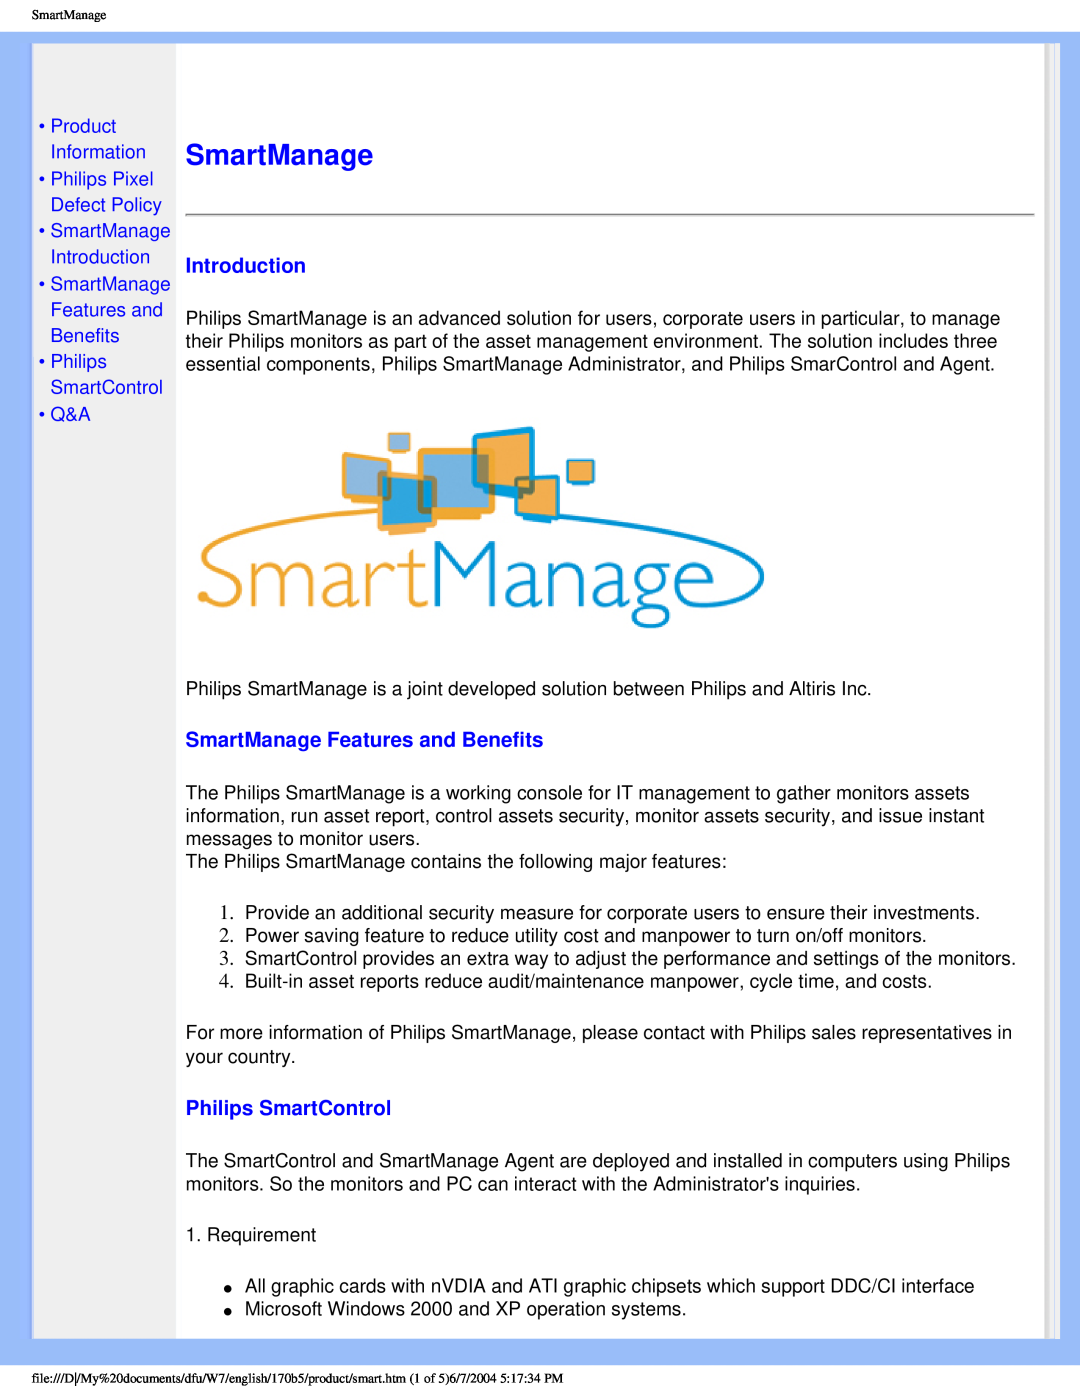 Philips 170B5 user manual SmartManage Features and Benefits, Philips SmartControl, SmartManage Introduction 